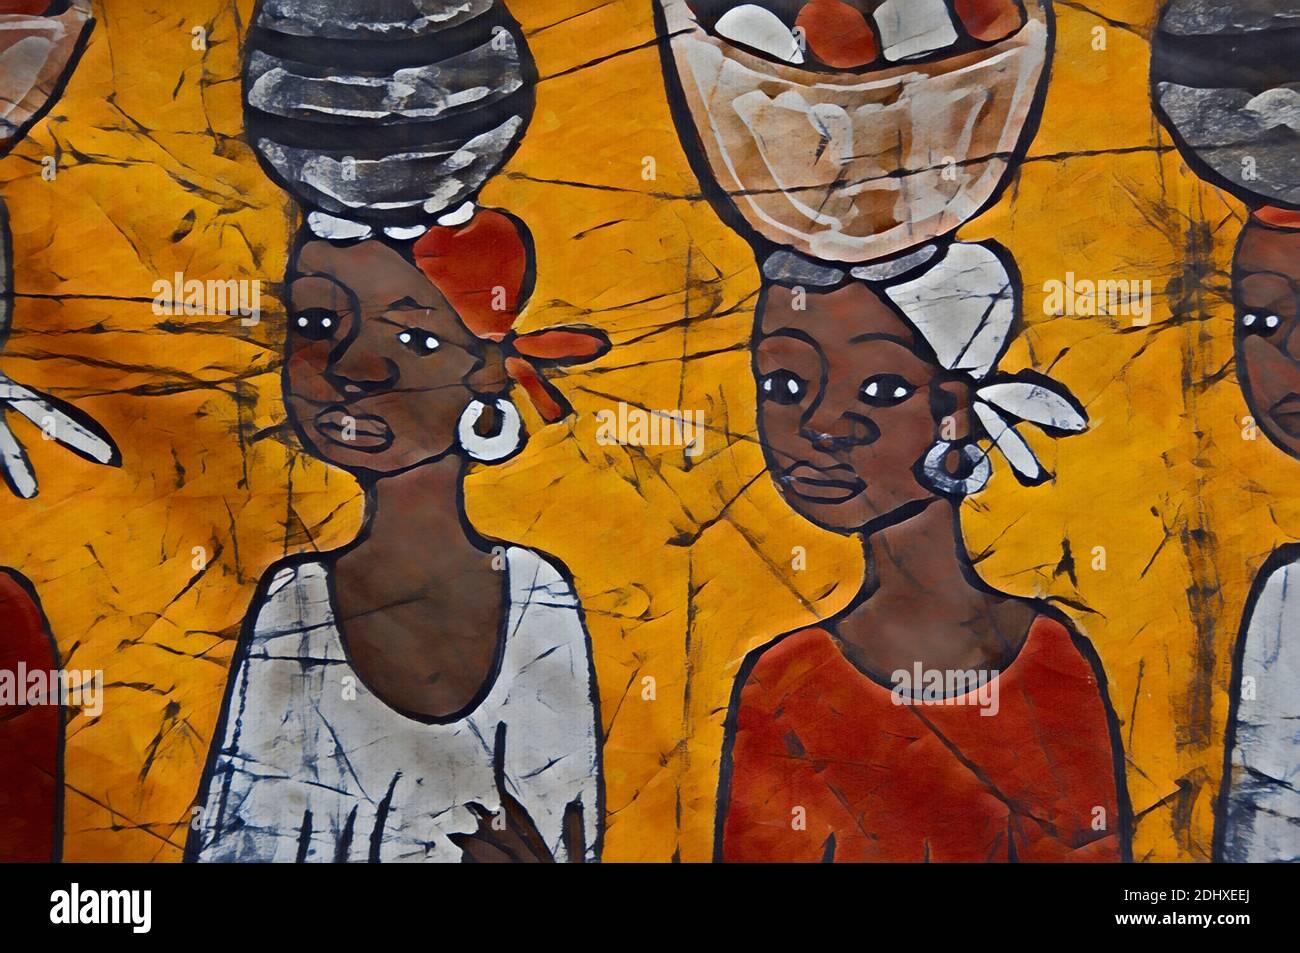 Africa, Gambia. Capital city of Banjul. Local batik workshop, colorful hand-painted textiles depicting every day African life & attire. Computerized Stock Photo